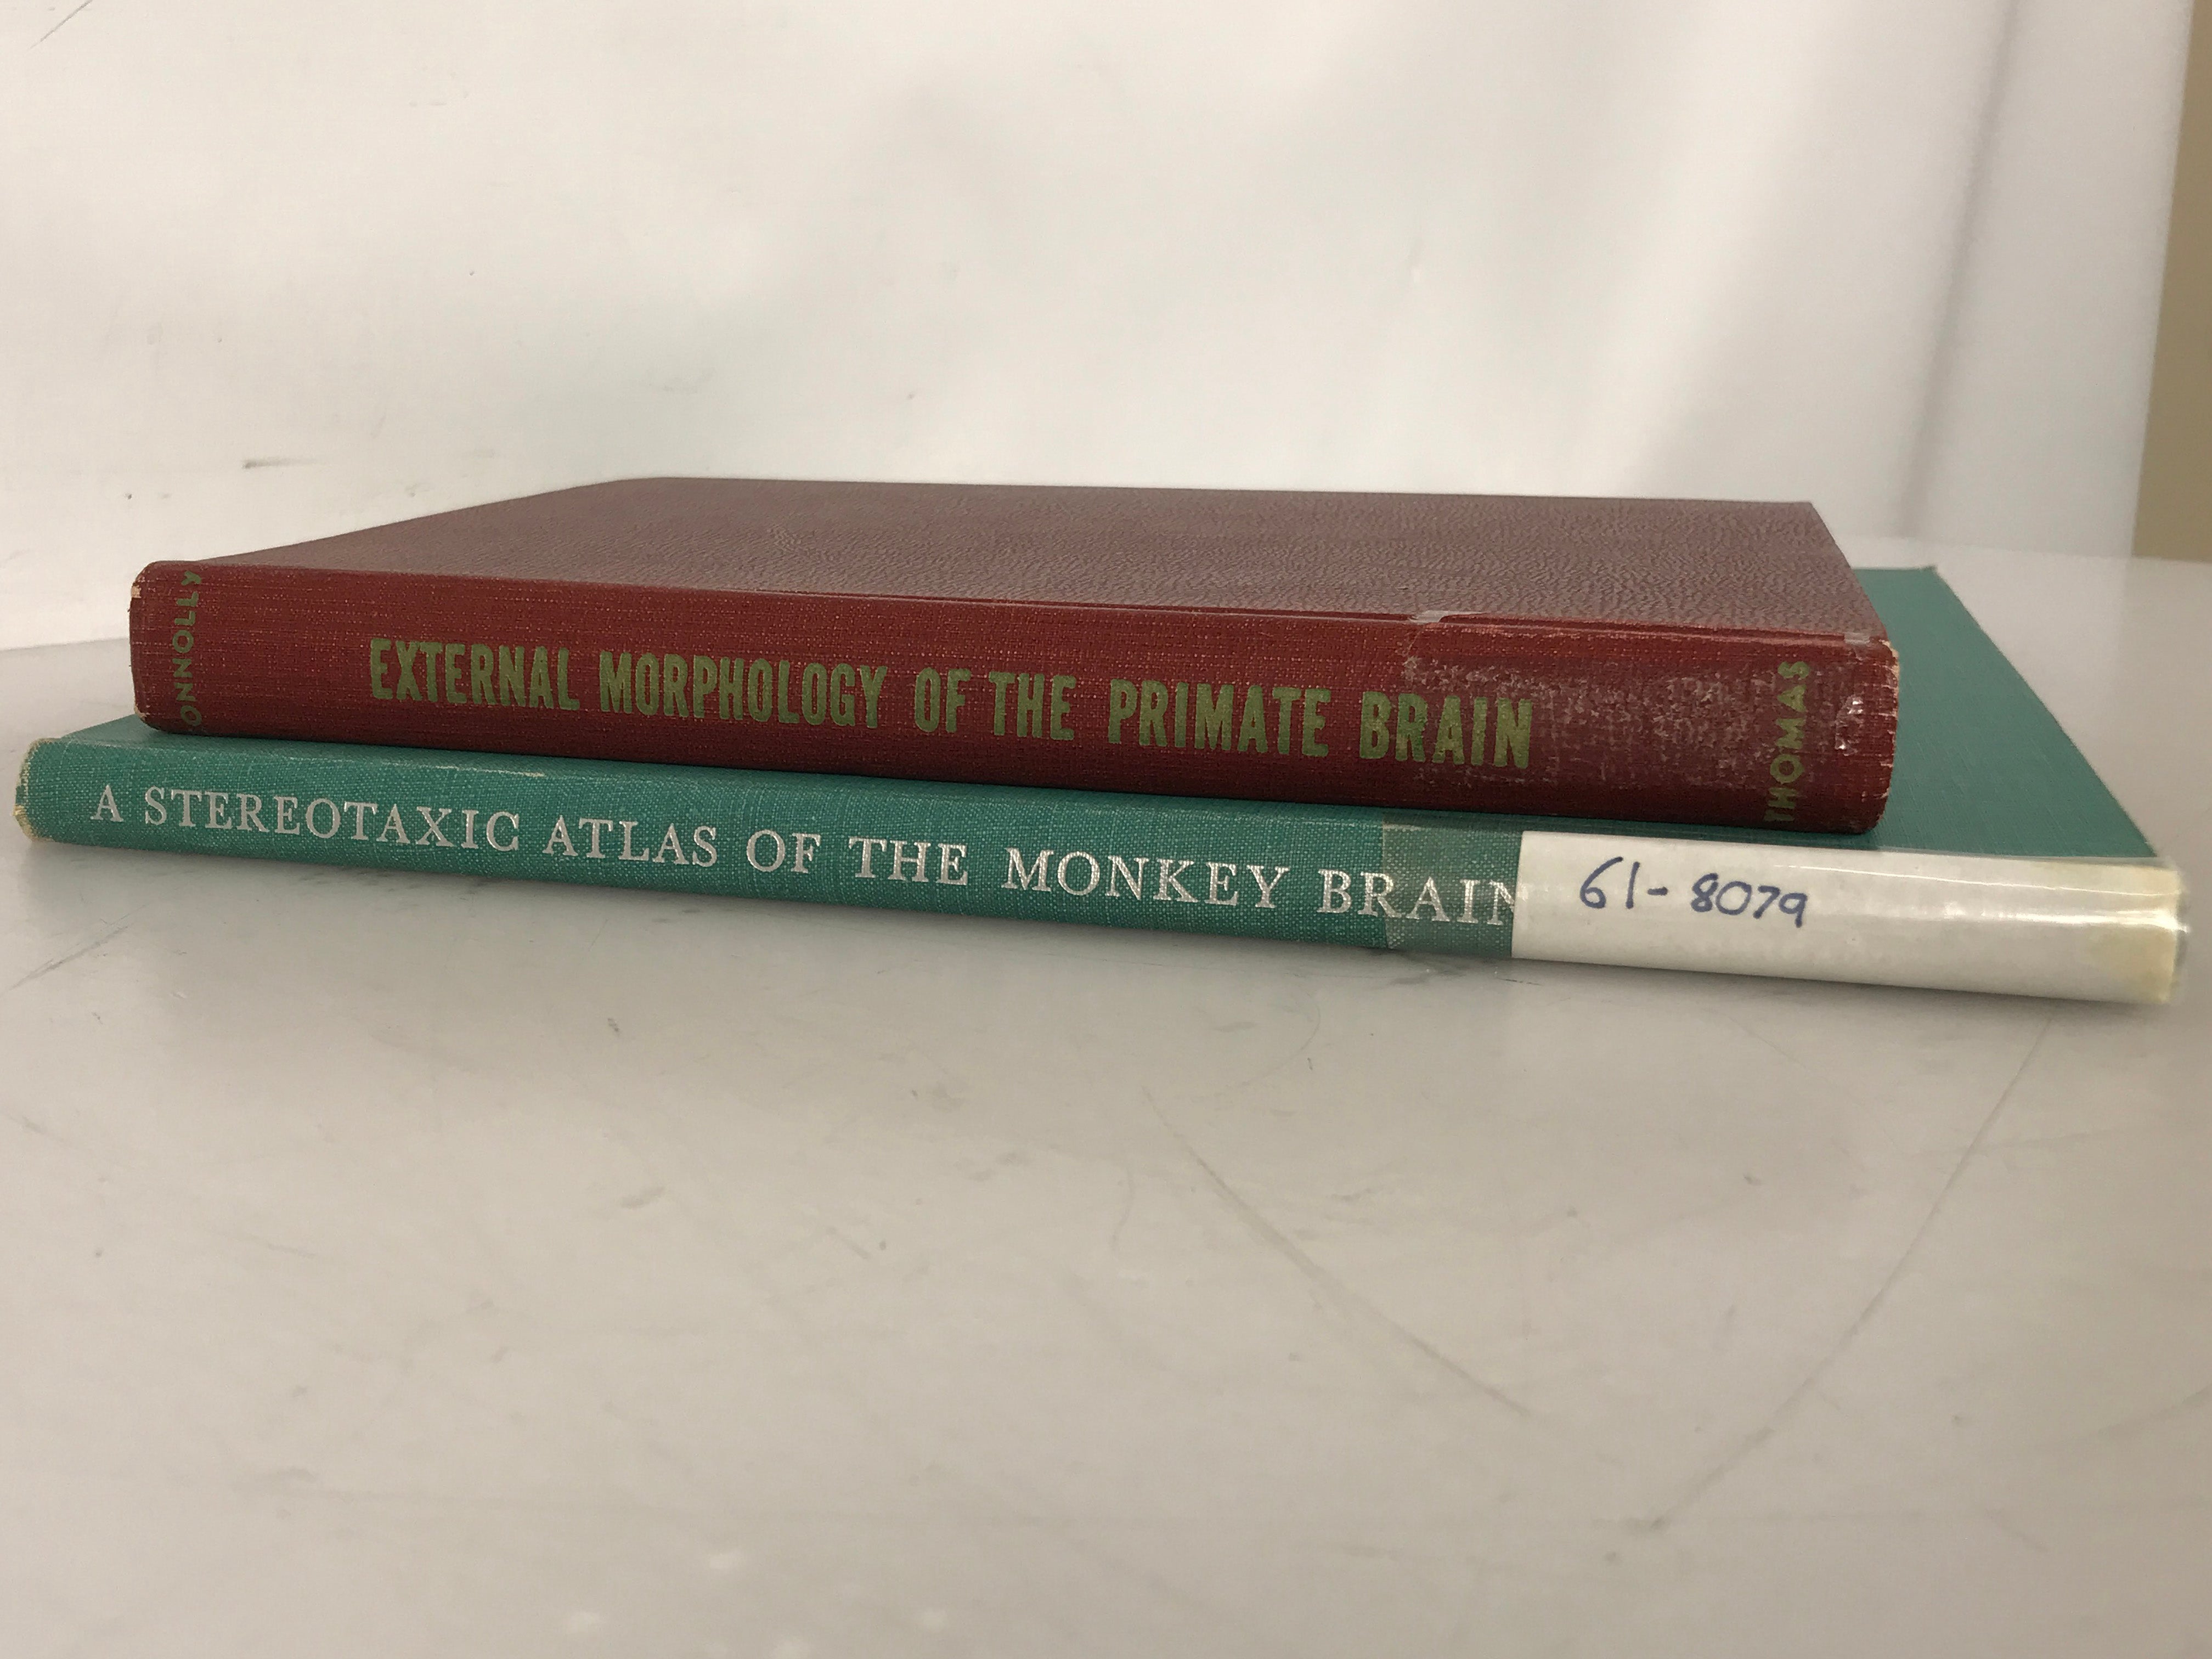 Lot of 2 Biology of the Brain Books: External Morphology of the Primate Brain (1950, First Edition) and A Stereotaxic Atlas of the Monkey Brain (1961) HC